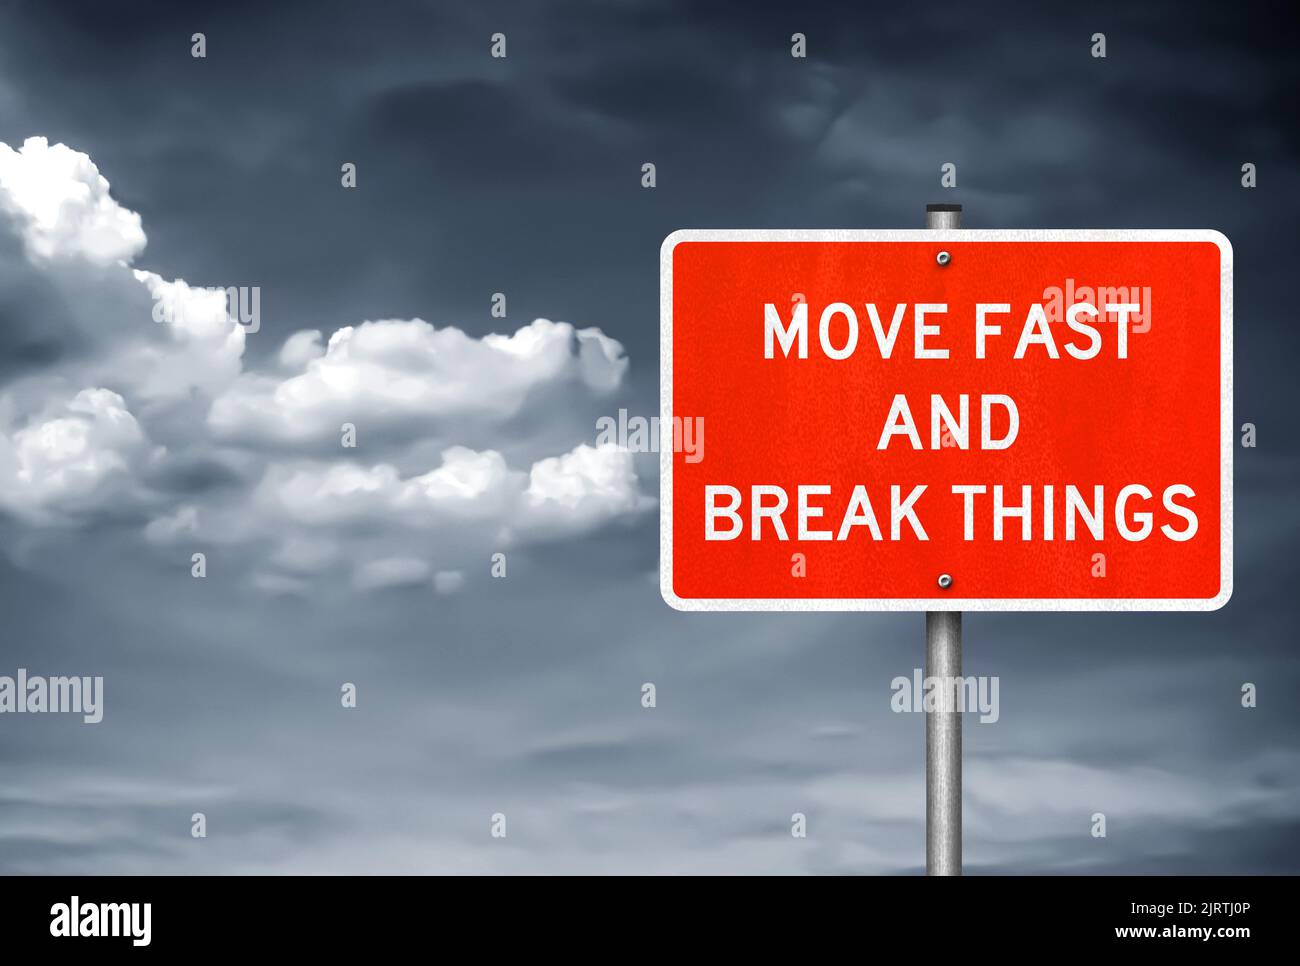 Road sign message - Move fast and break things Stock Photo